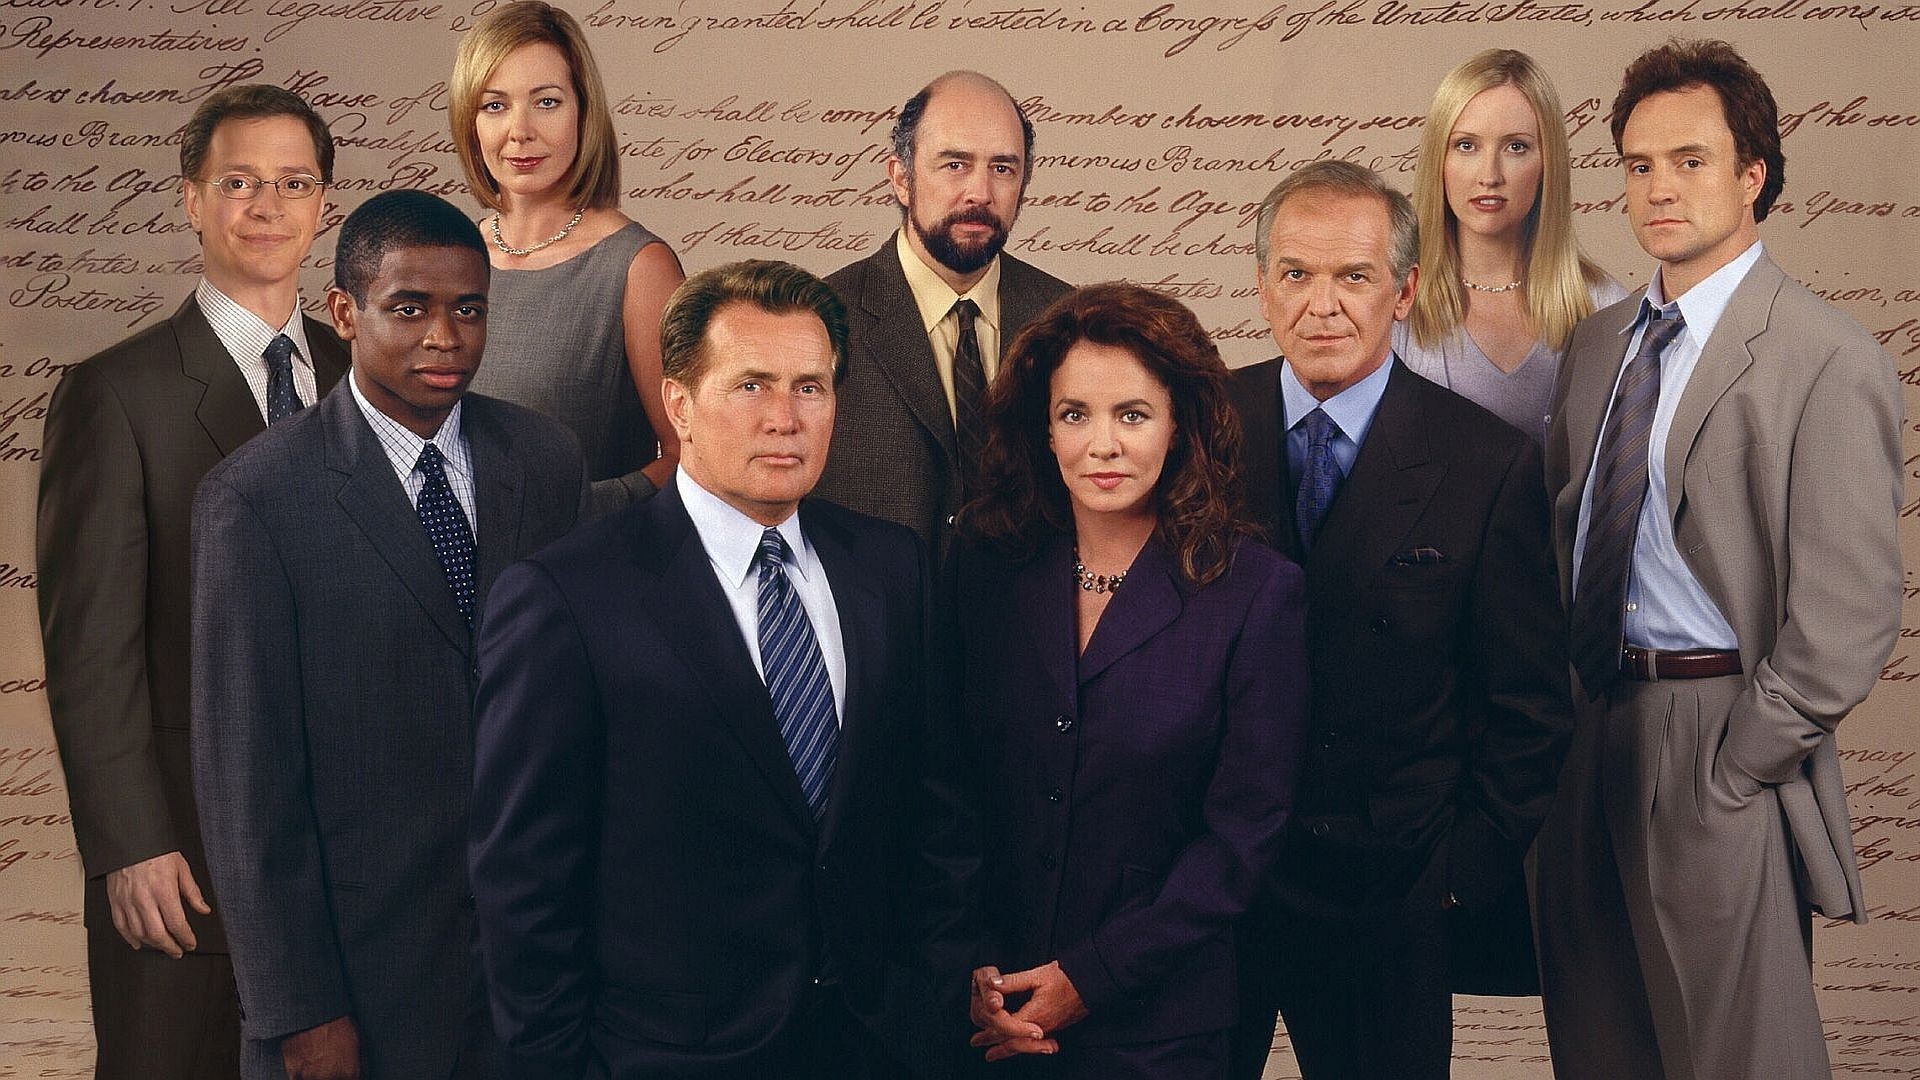 The West Wing Images. 